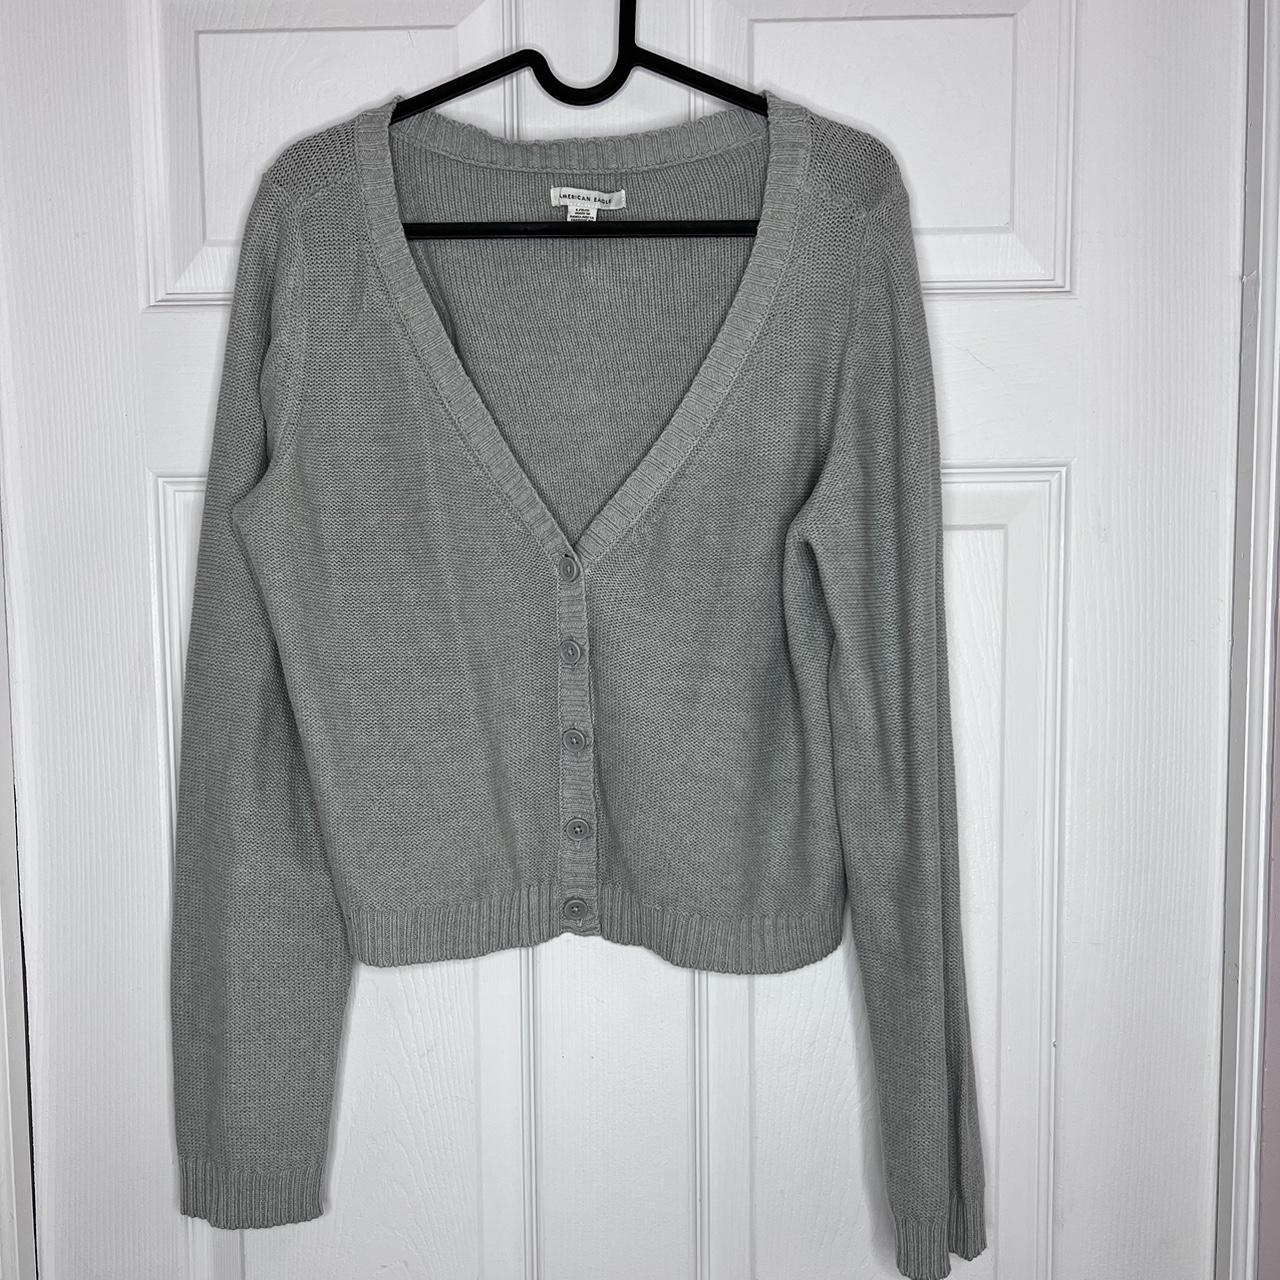 American Eagle Outfitters Women's Grey Cardigan | Depop